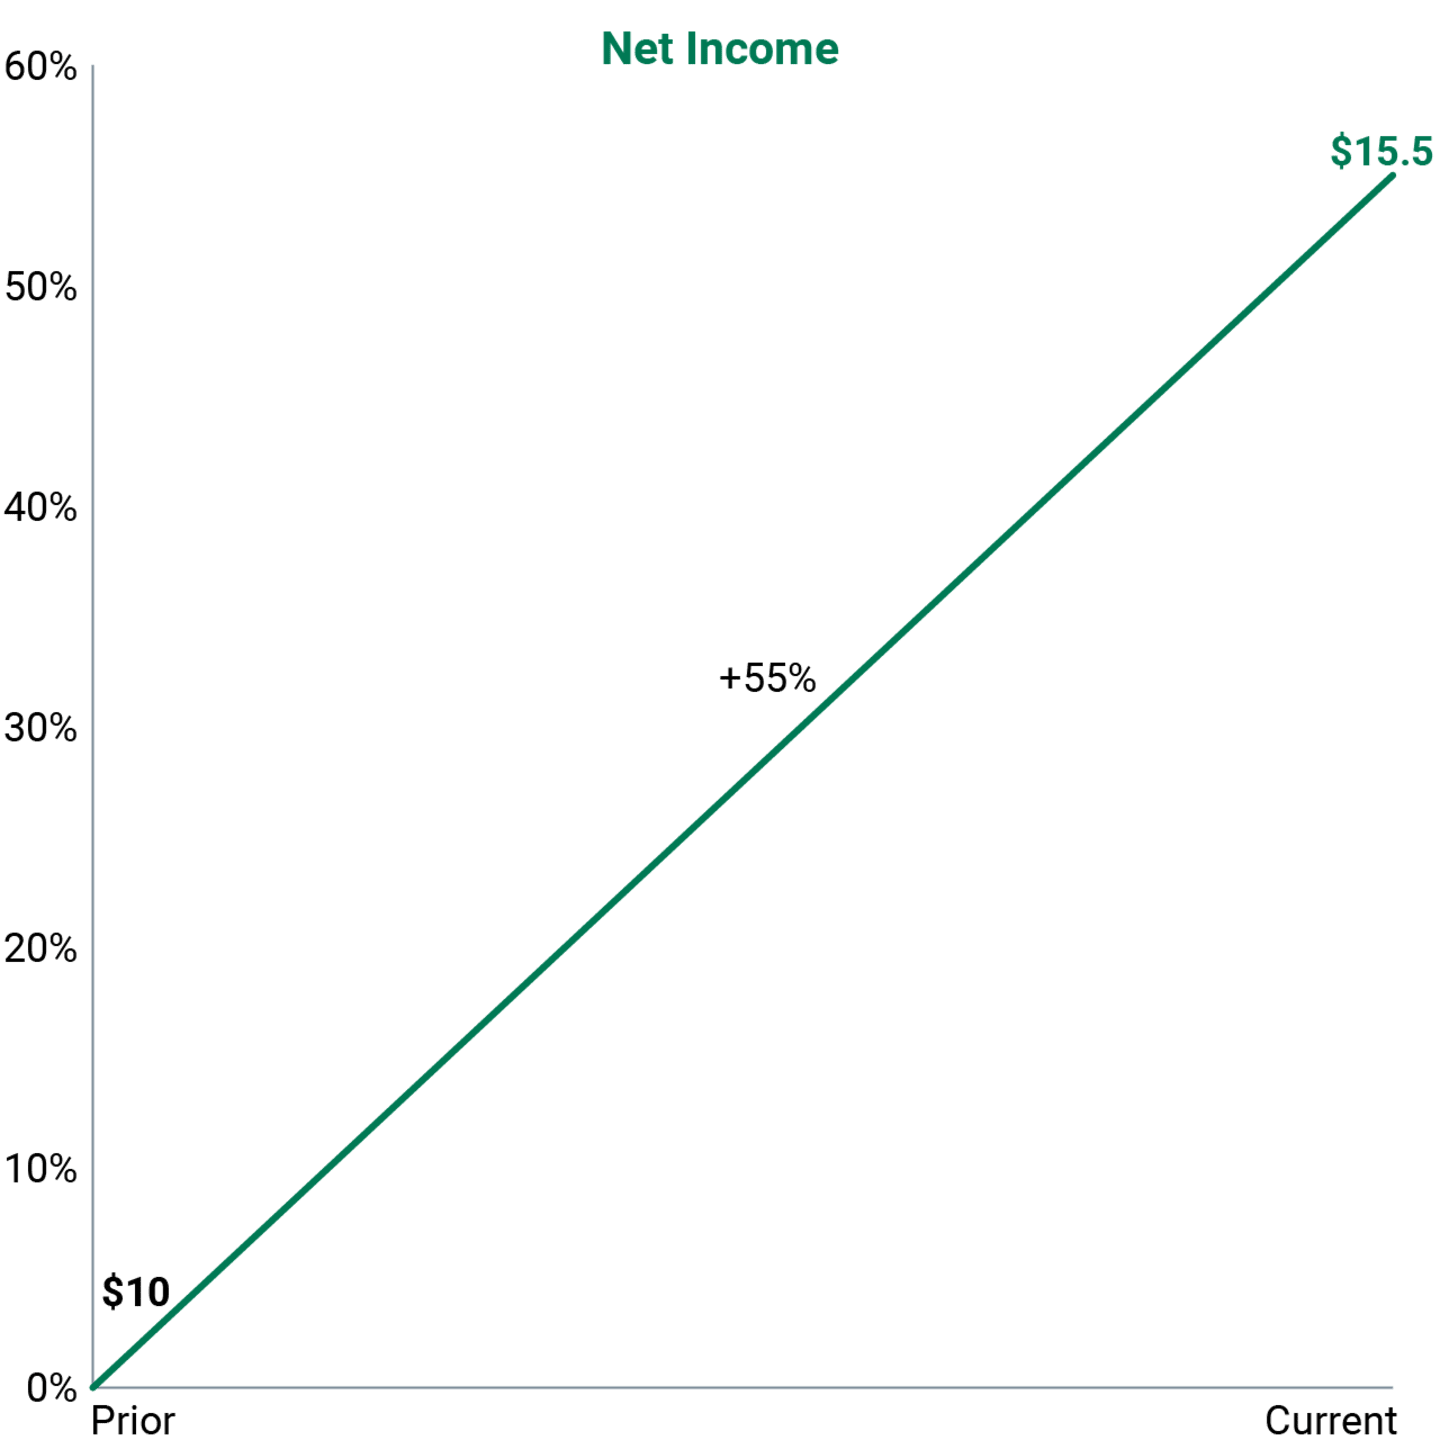 Hypothetical impact of 10% inflation on net income for typical industrial company.